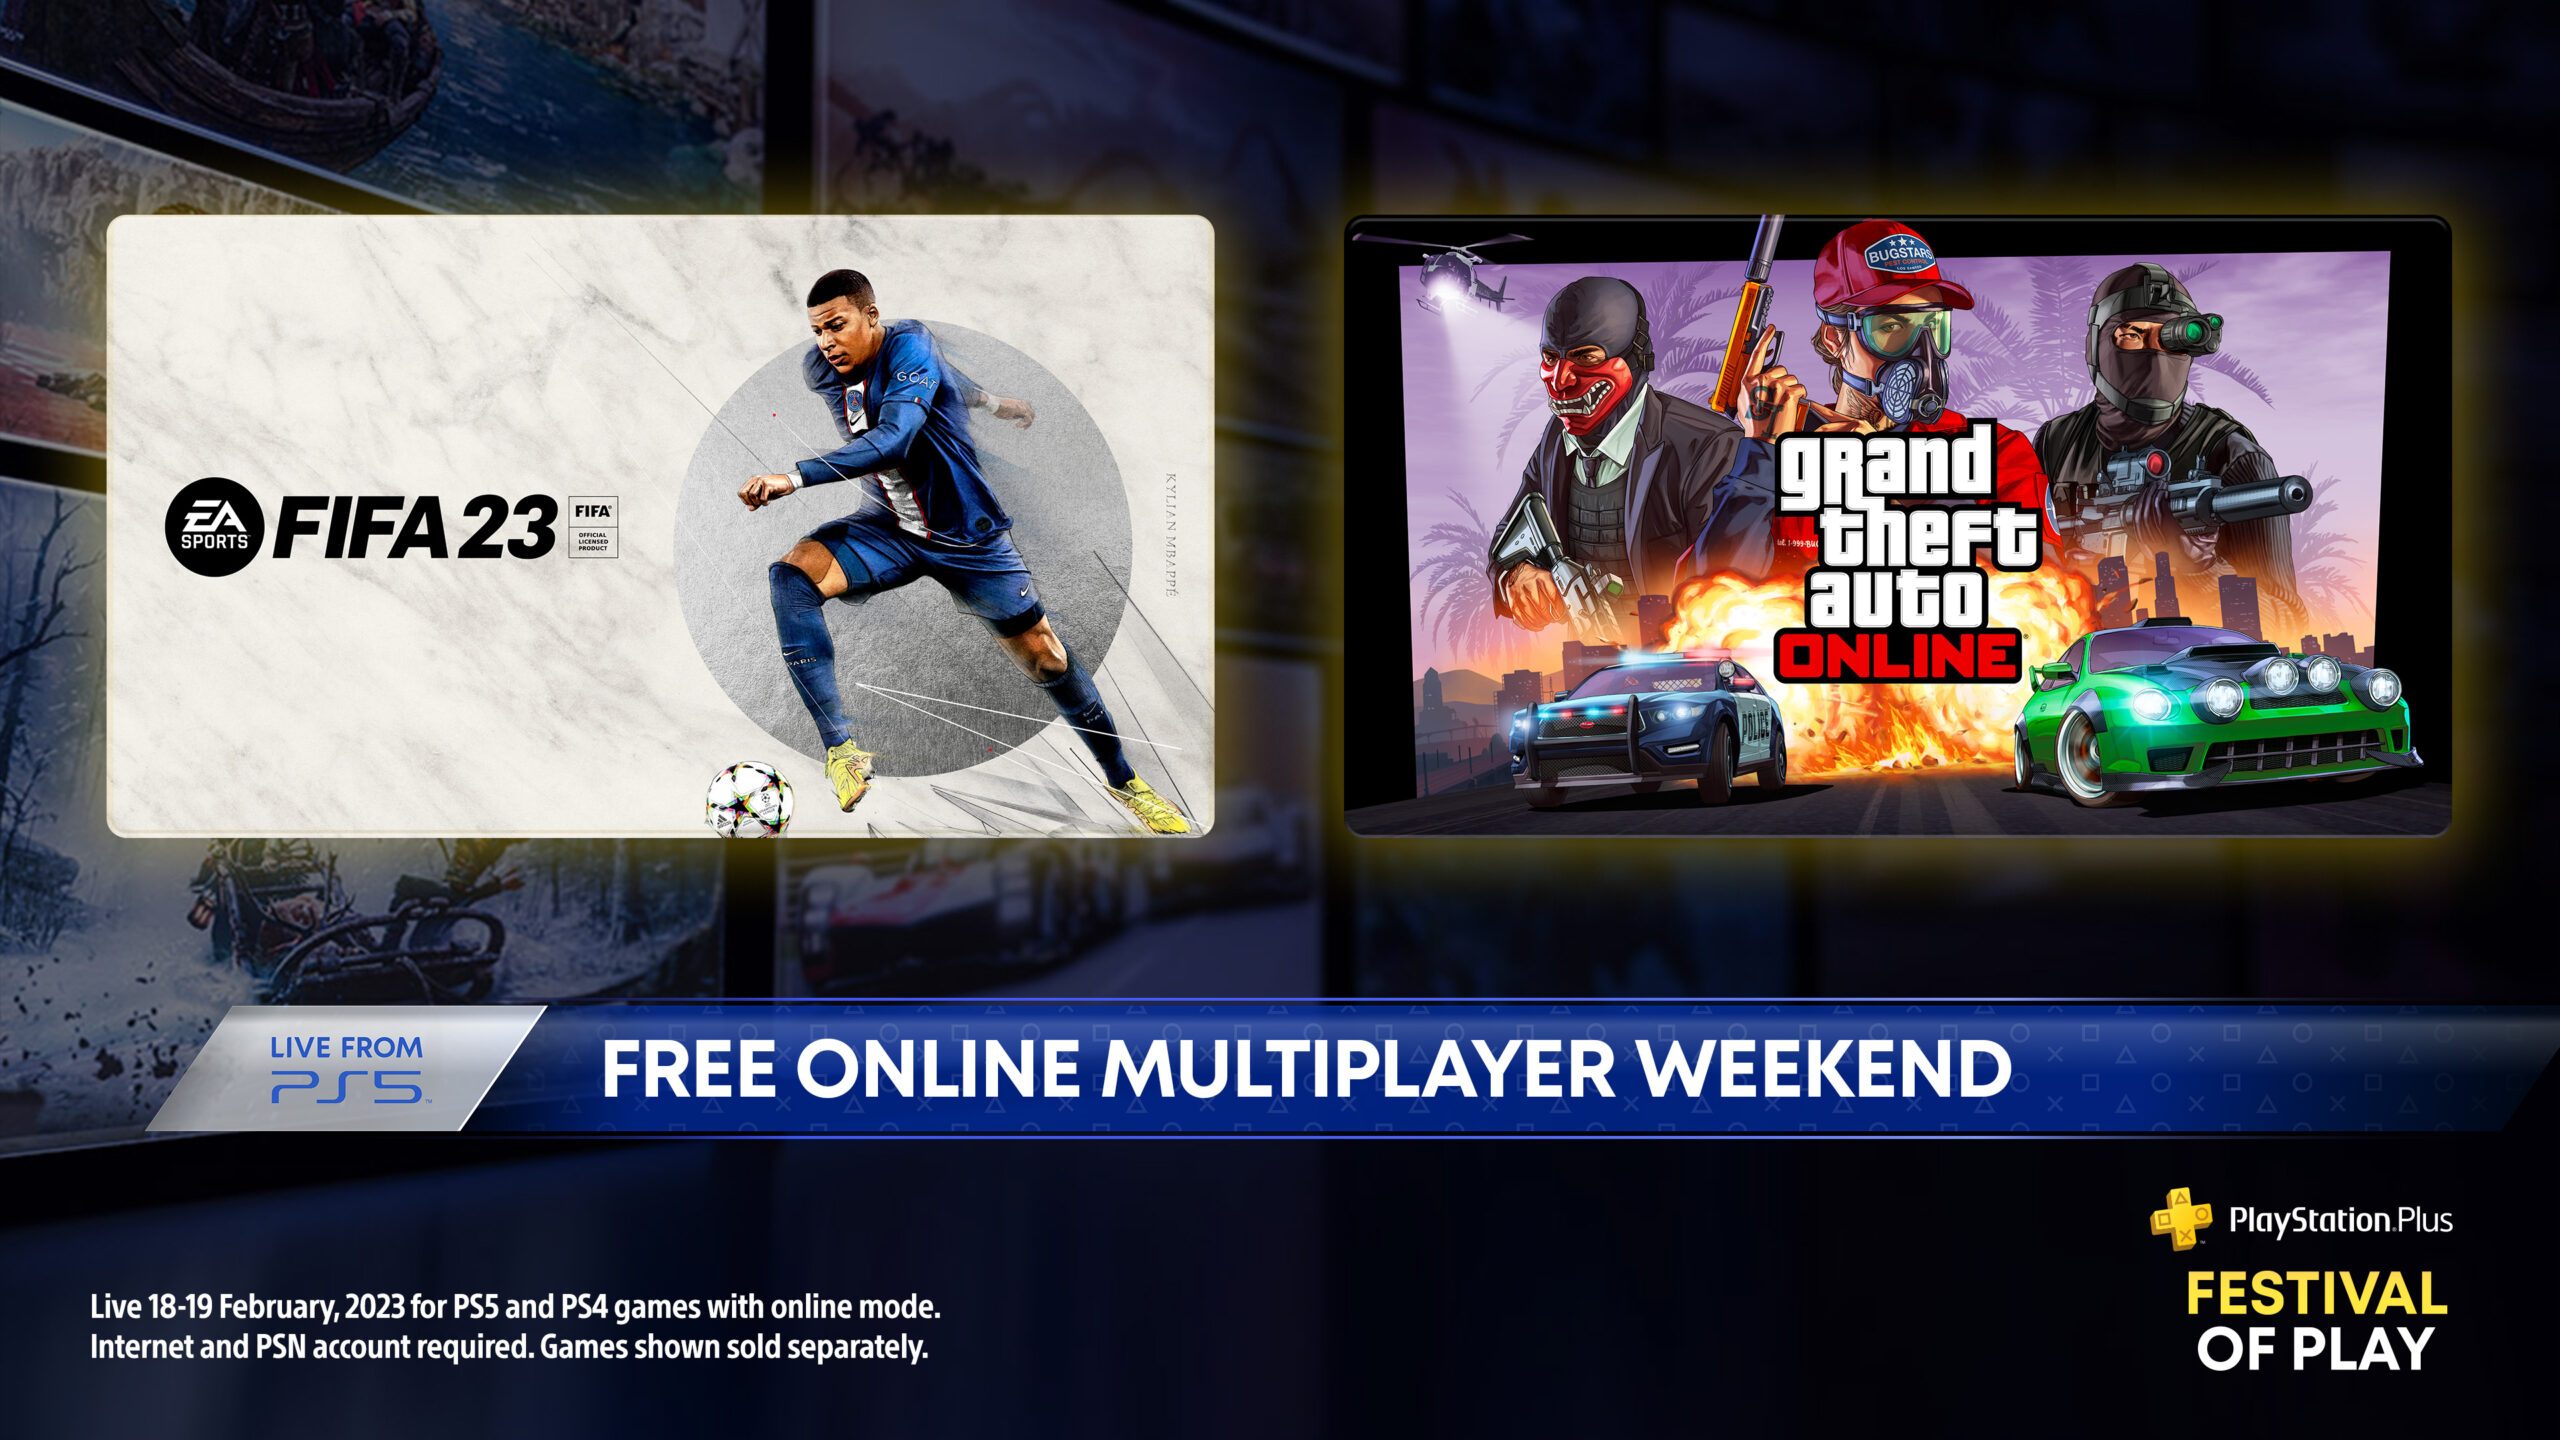 PlayStation Europe on X: PlayStation Plus is bringing you special FIFA 23,  NBA 2K23 and Guilty Gear -Strive- tournaments on PS5 and PS4. Compete for  your chance to win a three month